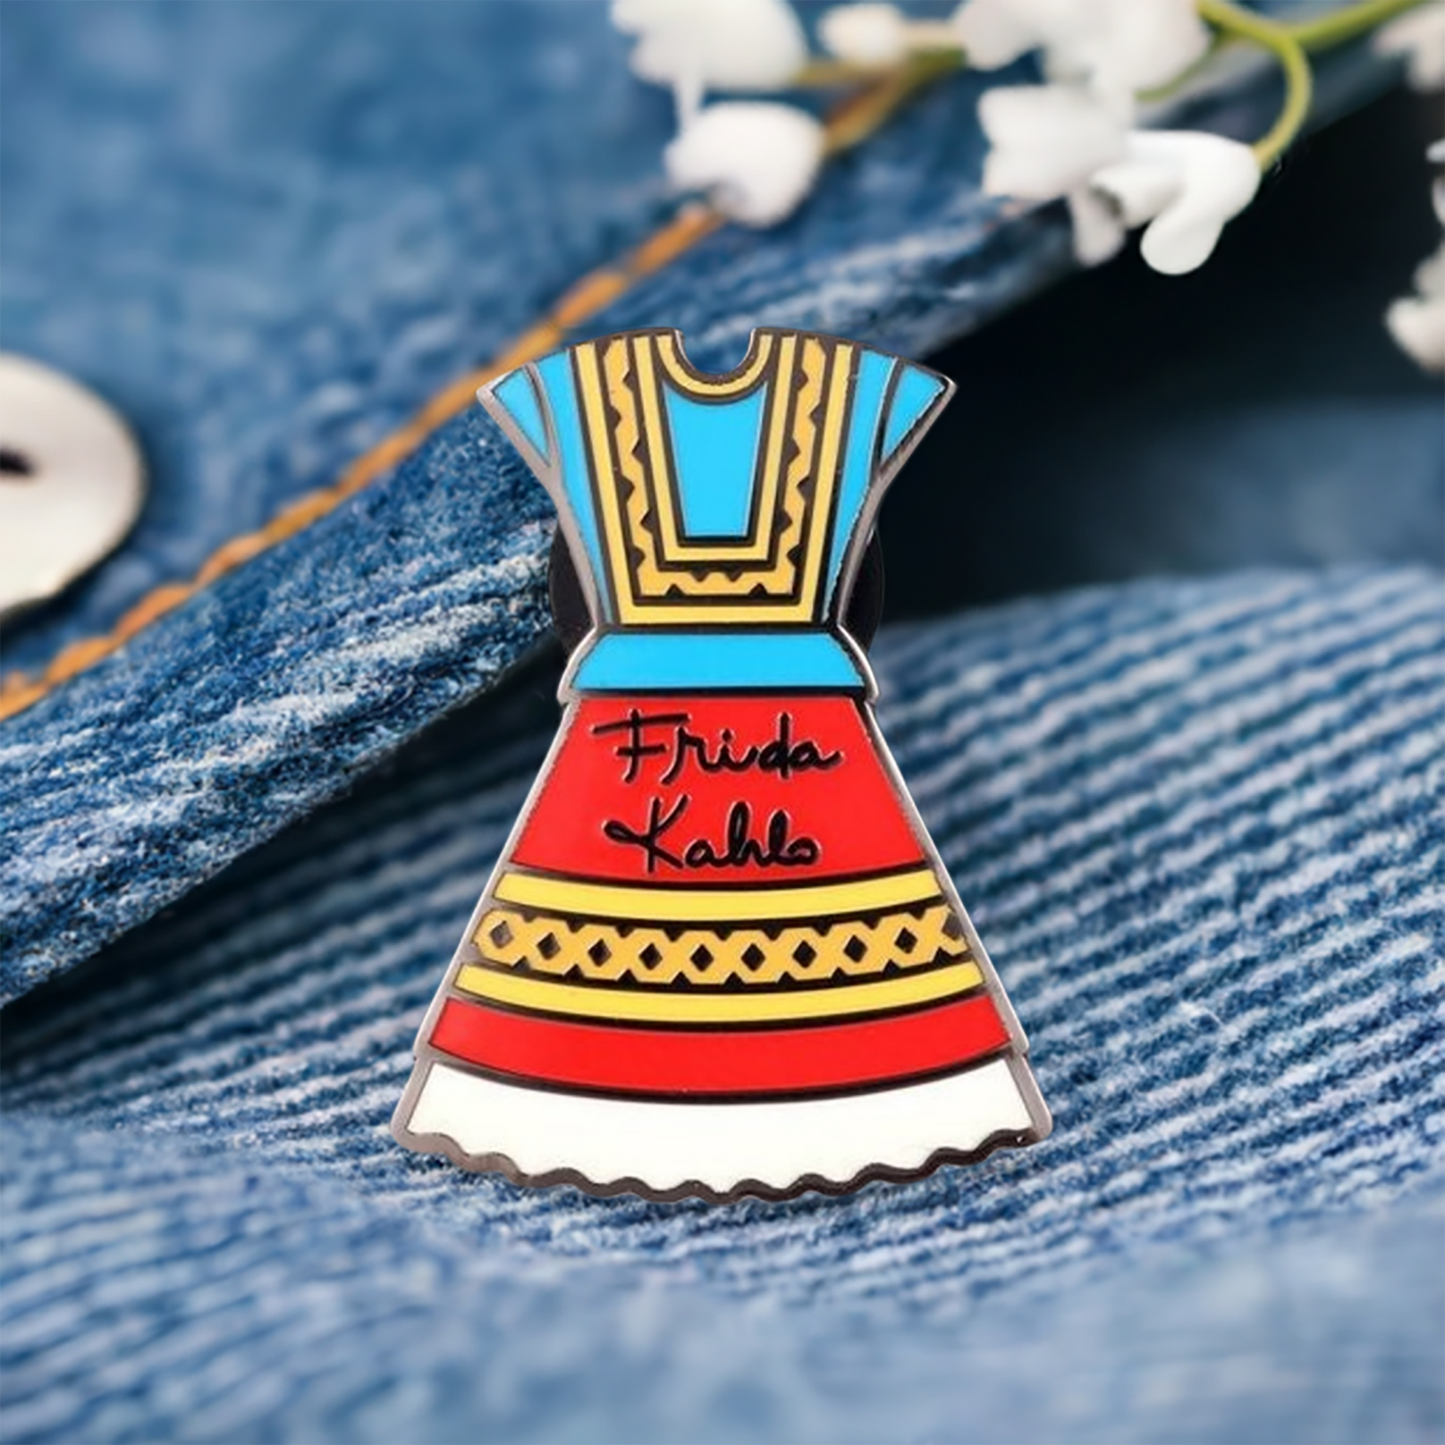 Frida Kahlo Dress Enamel Pin. Colorful red, blue, yellow, and white traditional Mexico Tehuana Oaxaca dress used by Mexican artist. With Frida Kahlo original signature on front. Cute gift idea for fridamaniacs and fridalovers.